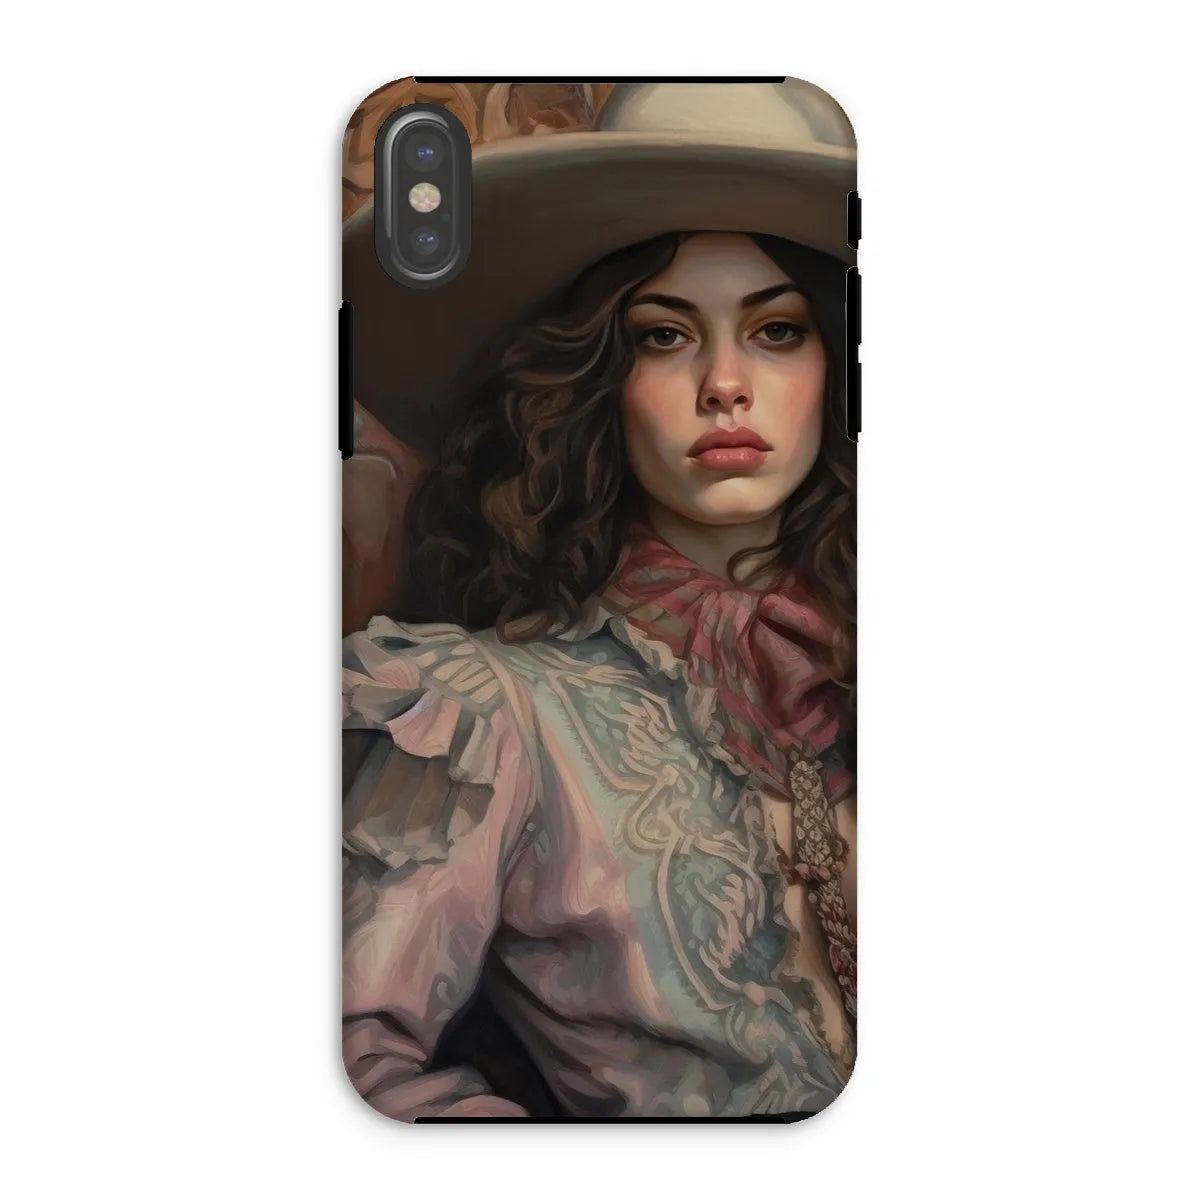 Alex The Lesbian Cowgirl - Sapphic Art Phone Case - Iphone Xs / Matte - Mobile Phone Cases - Aesthetic Art